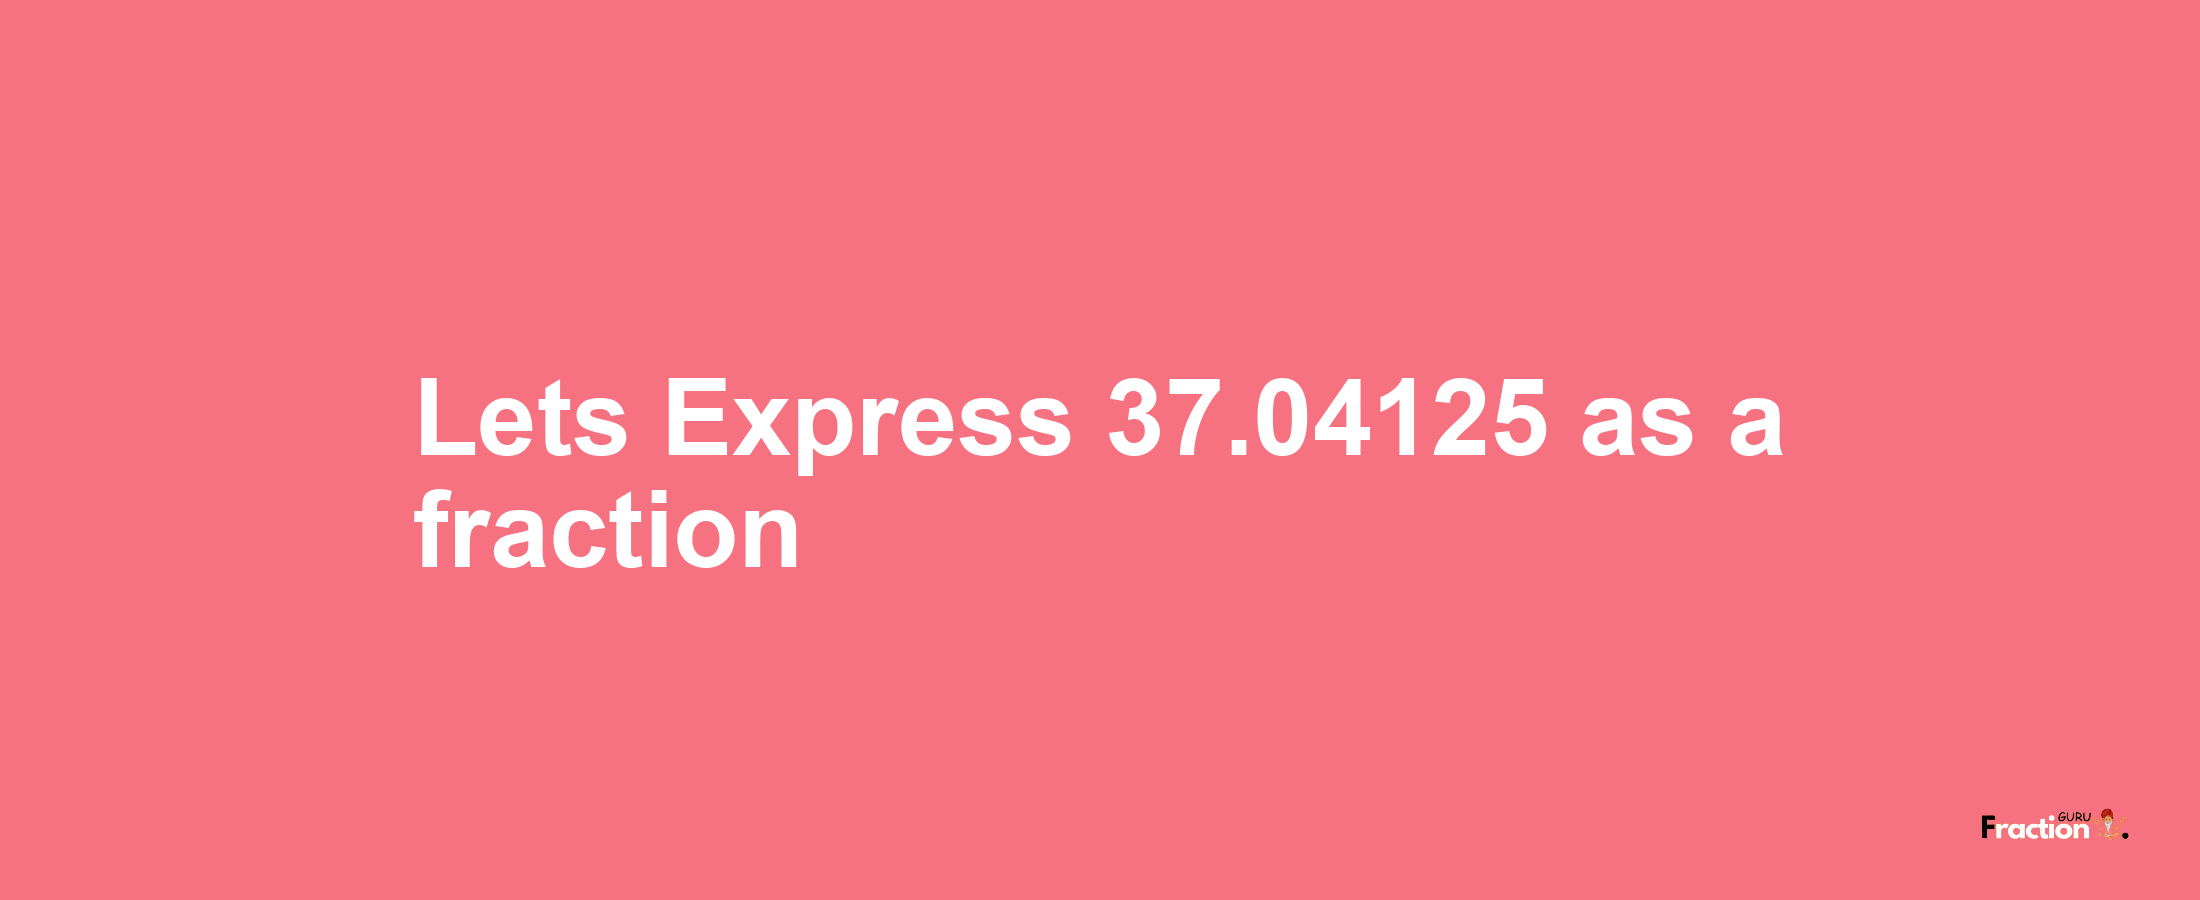 Lets Express 37.04125 as afraction